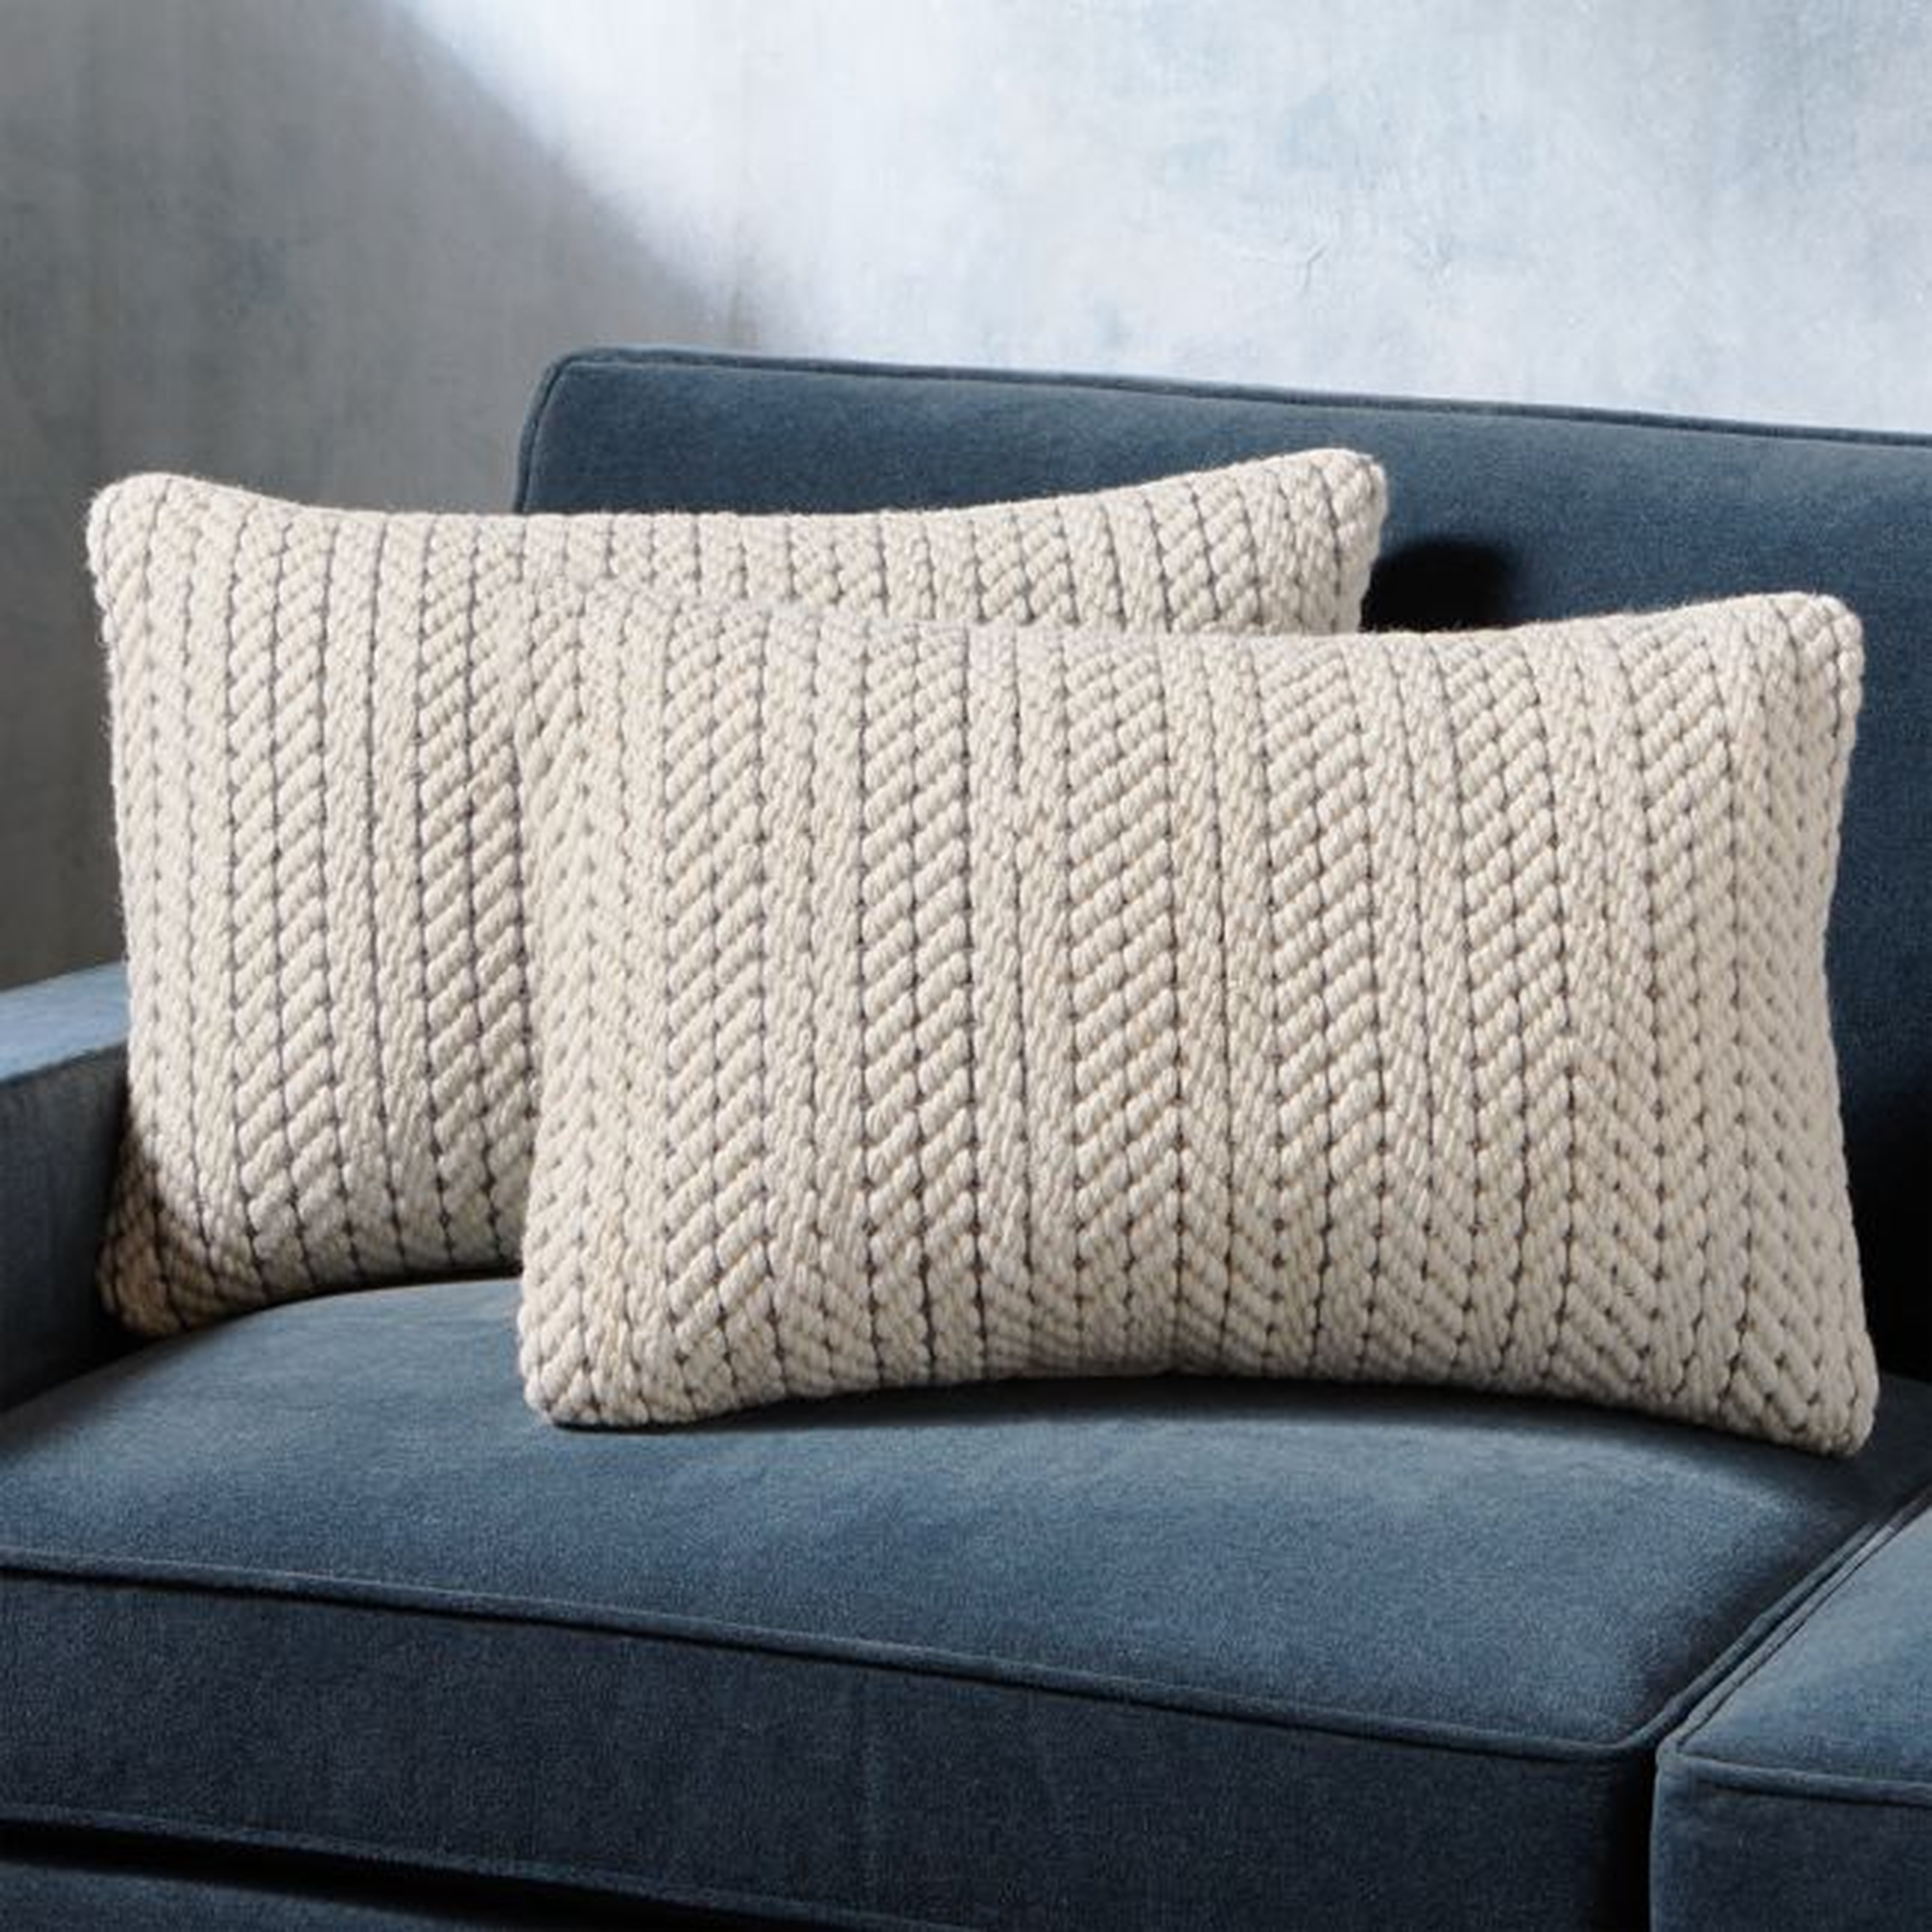 Byron Rope Weave Pillow 24"x16", Set of 2 - Crate and Barrel